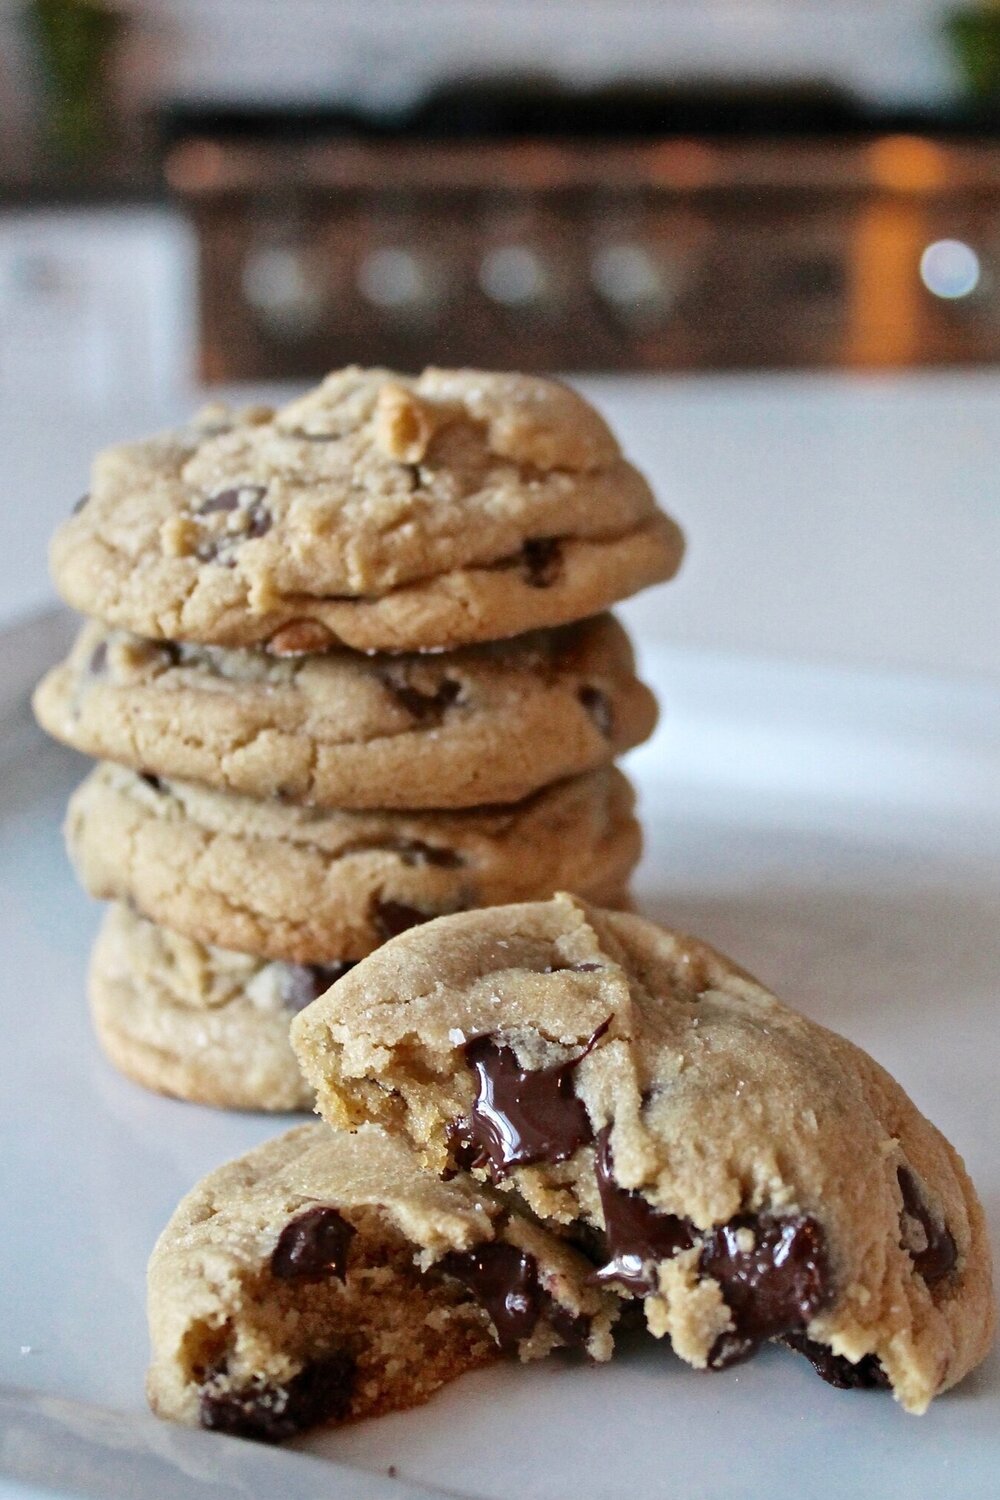 A classic, soft chocolate chip cookie from Cake By Courtney.